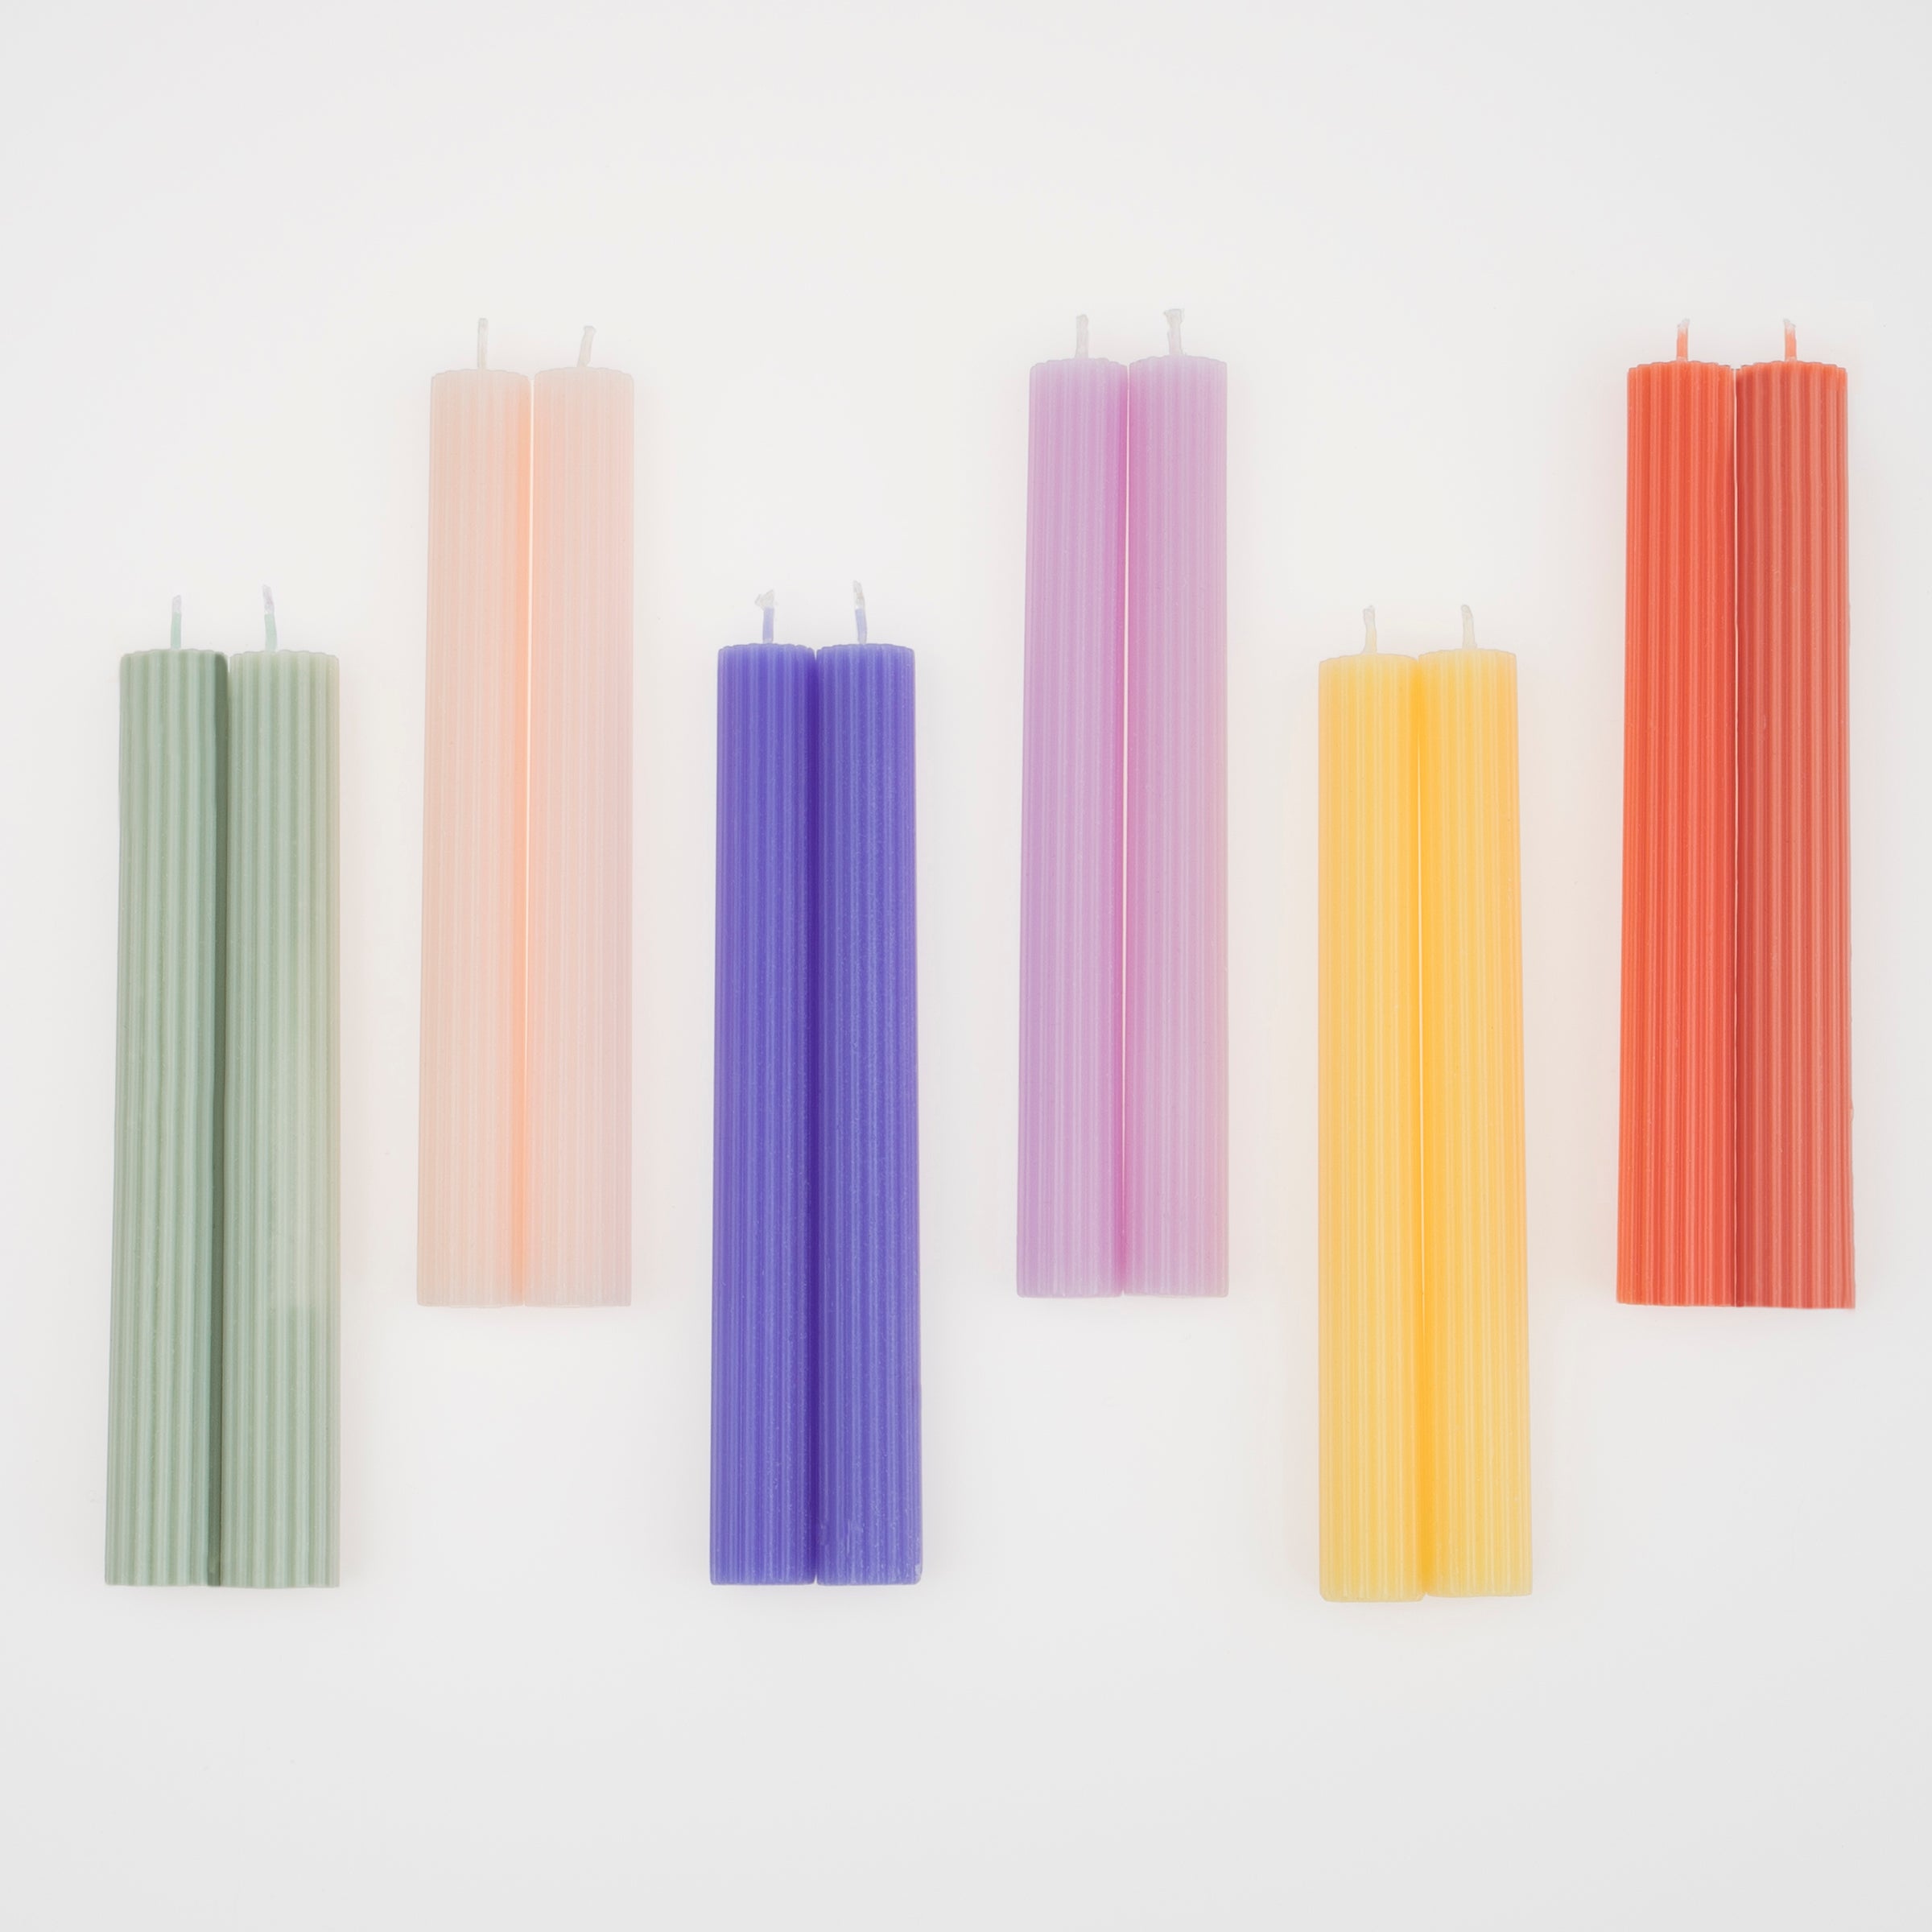 Our decorative candles in coral, pink, blue, sage and yellow will add colour to your party table.